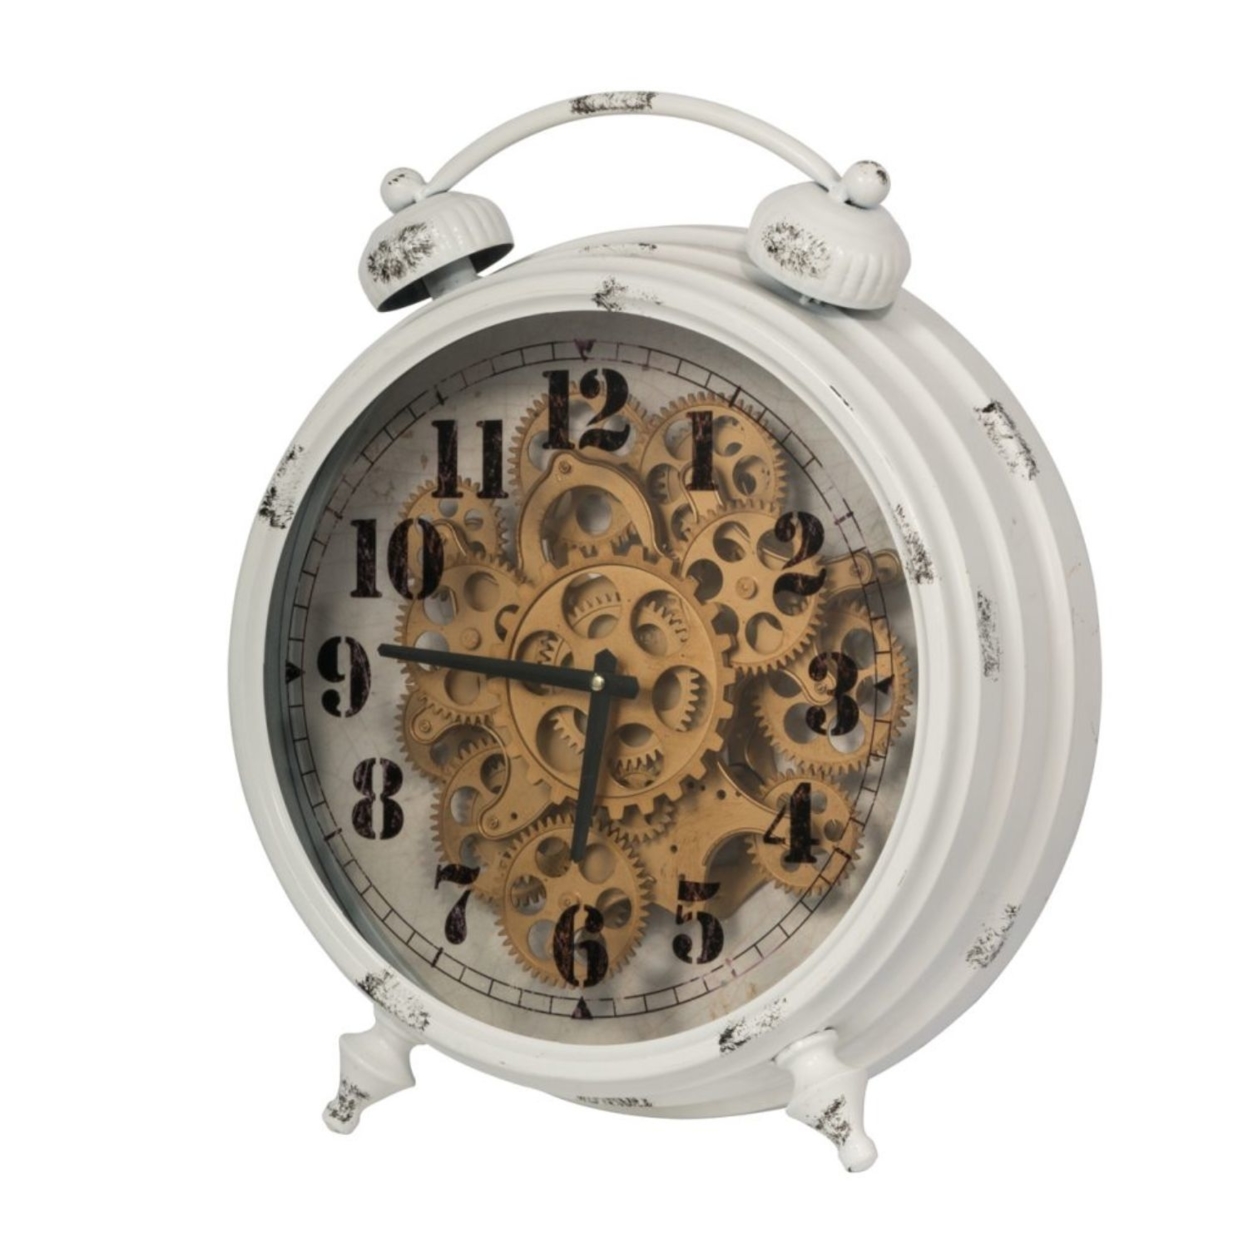 Saltoro Sherpi Benjara Classic Metal Table Clock with Gears Front and Distressed Details, White and Gold